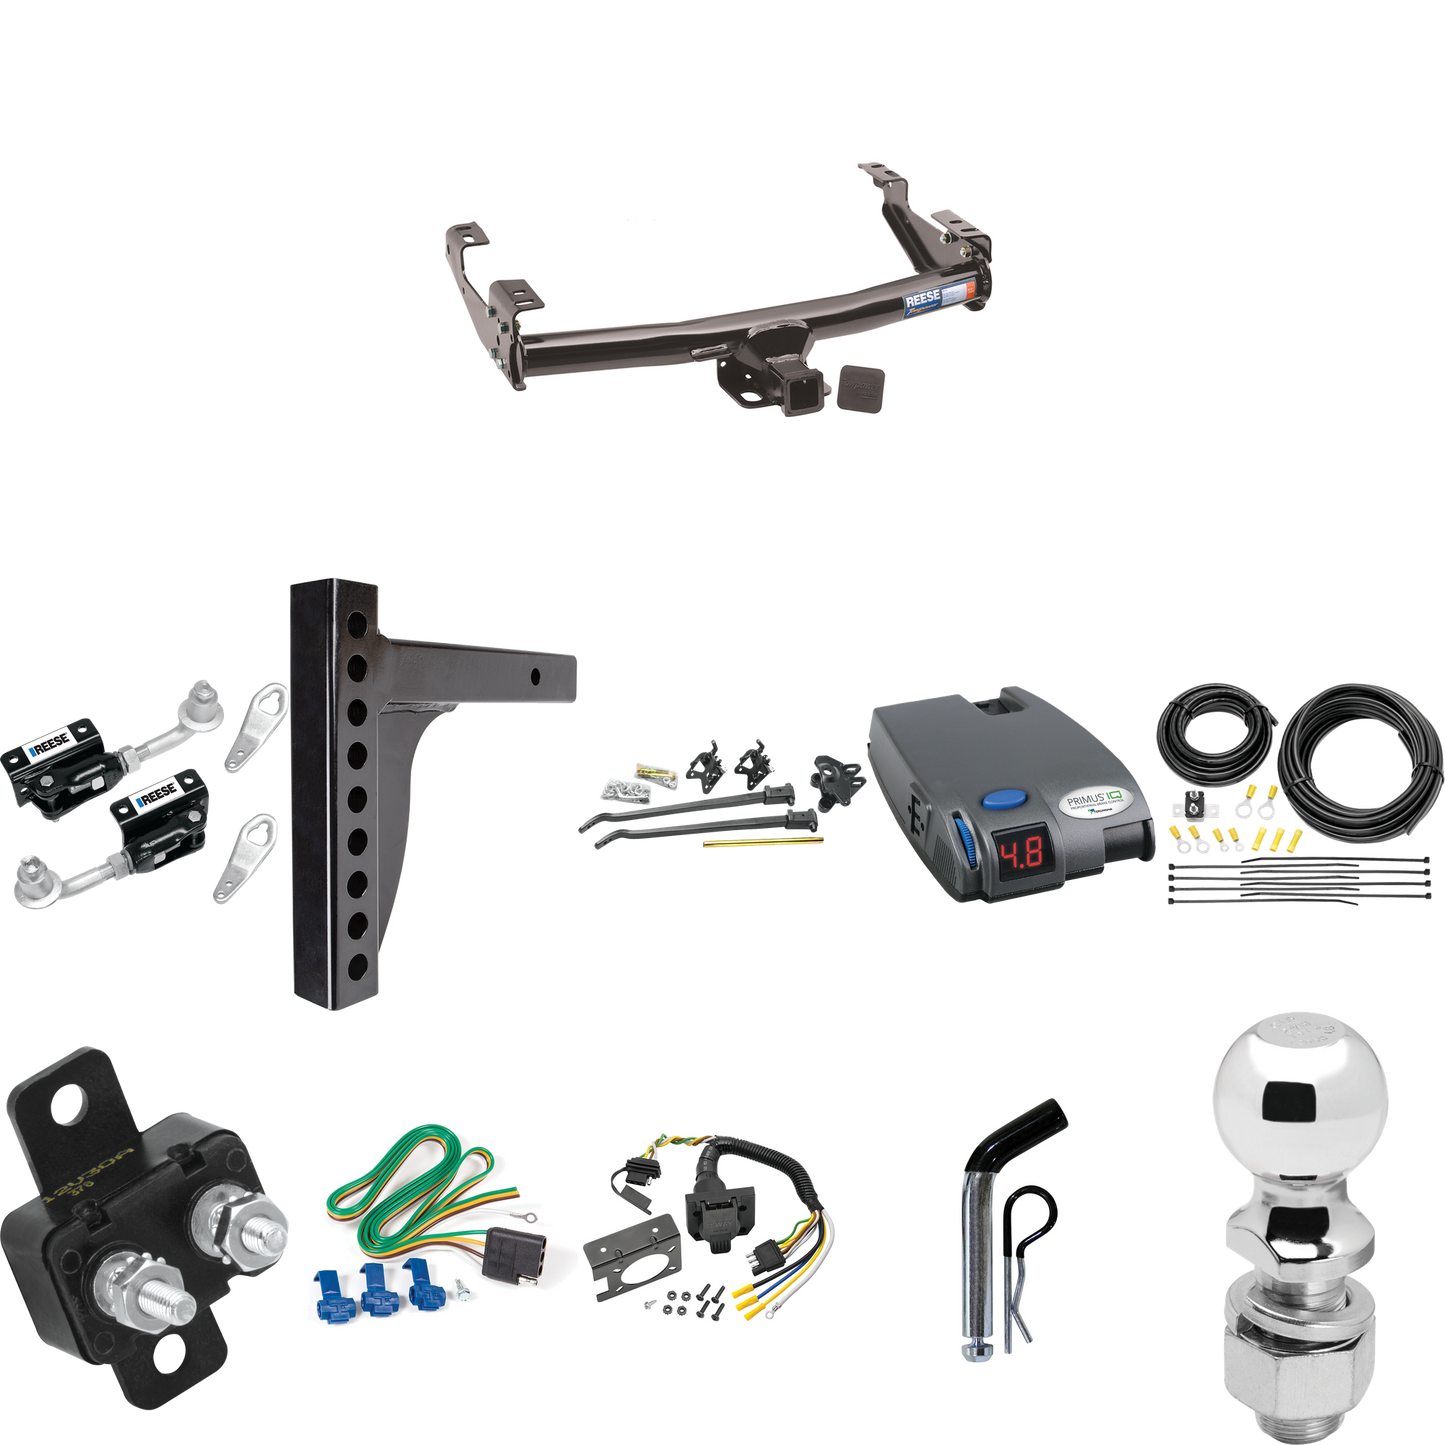 Fits 1971-1993 Dodge D150 Trailer Hitch Tow PKG w/ 12K Trunnion Bar Weight Distribution Hitch + Pin/Clip + Dual Cam Sway Control + 2-5/16" Ball + Tekonsha Primus IQ Brake Control + 7-Way RV Wiring By Reese Towpower